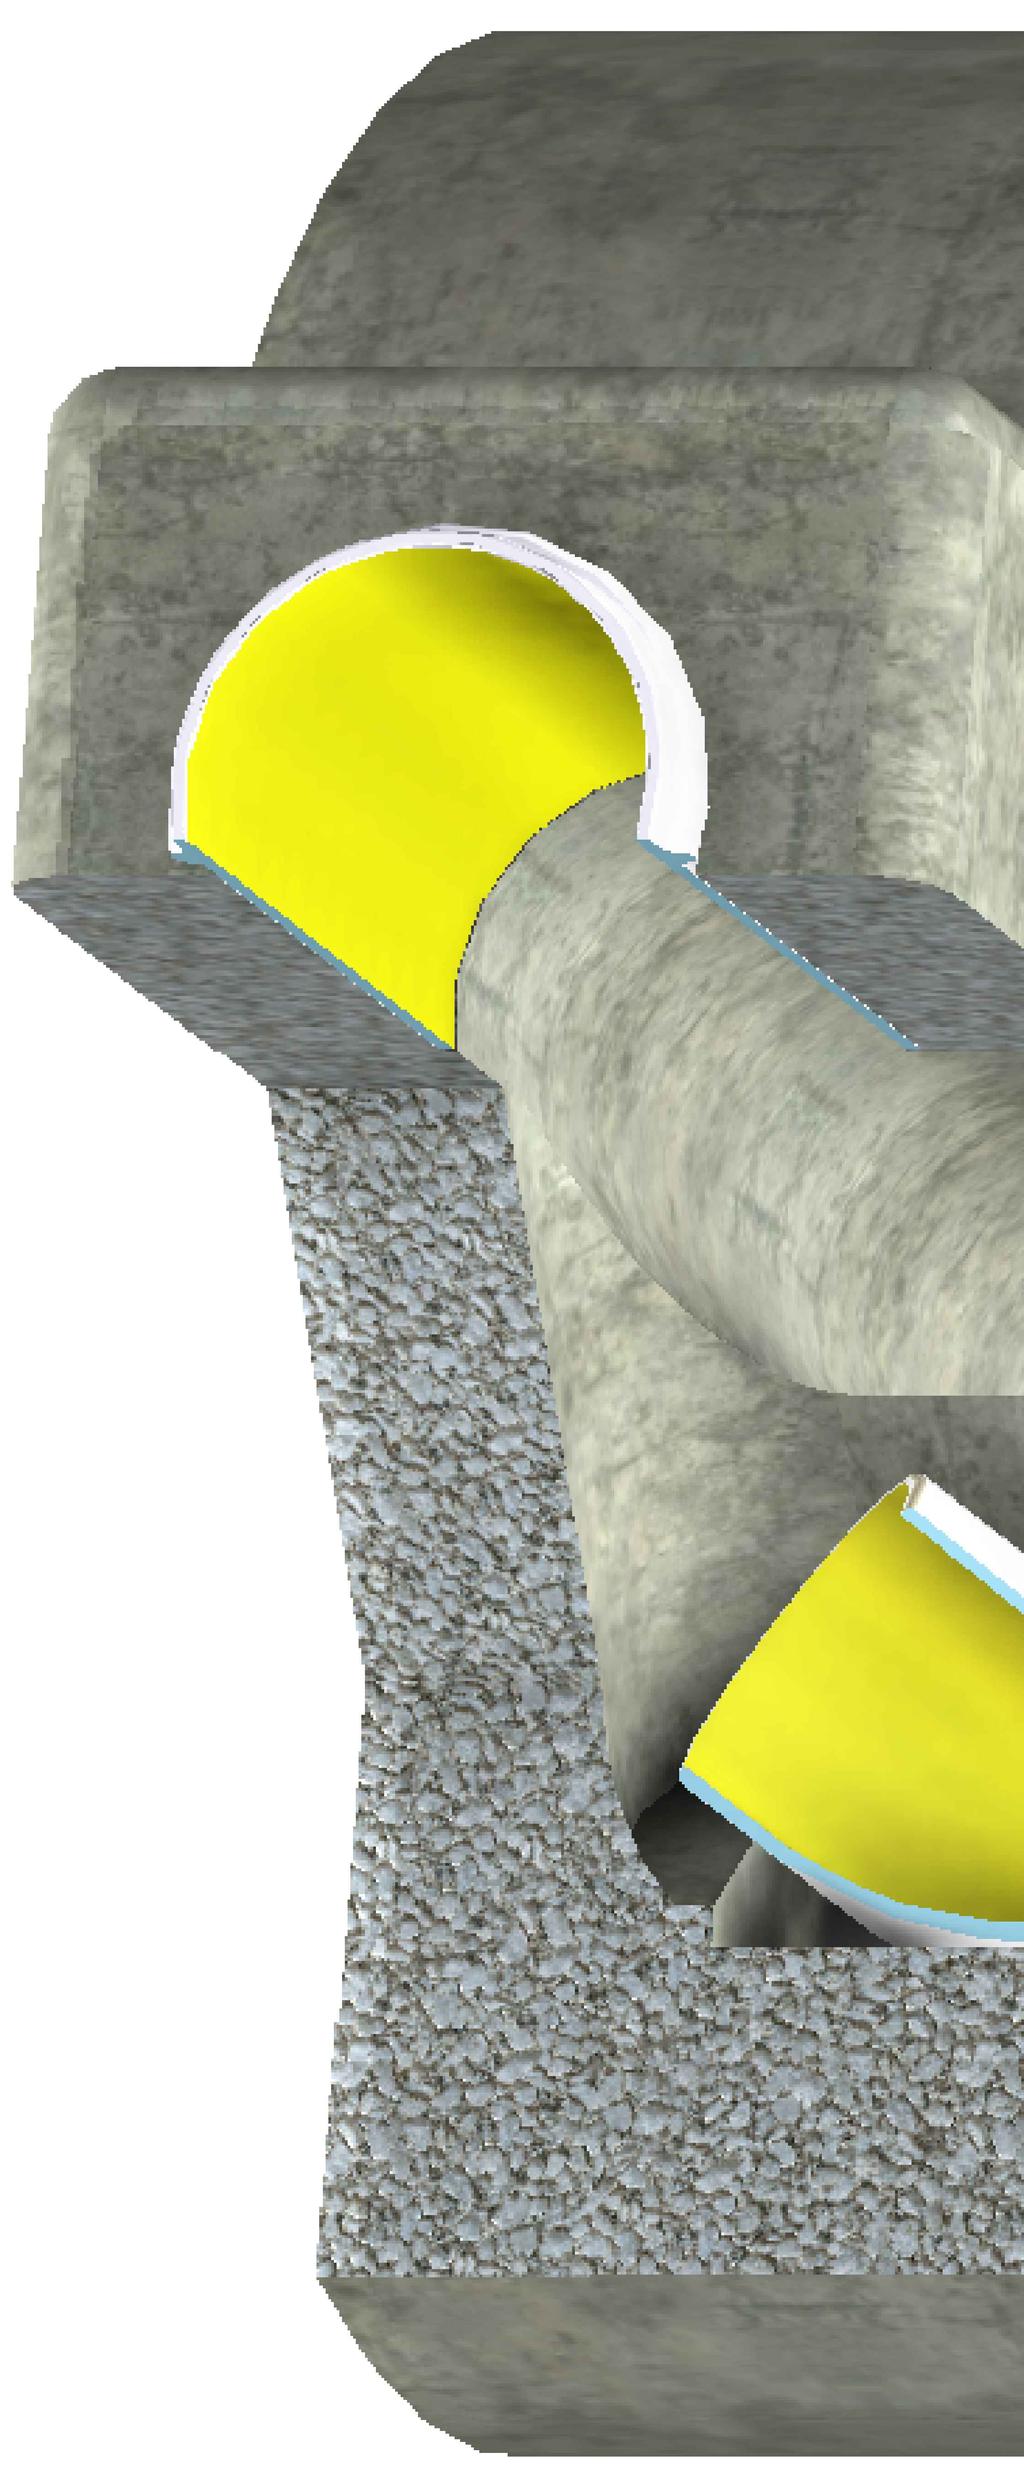 lug the entry point of any prefabricated chase used to receive dropped flows. tem. poxy or cement mortar behind bend if concrete base.